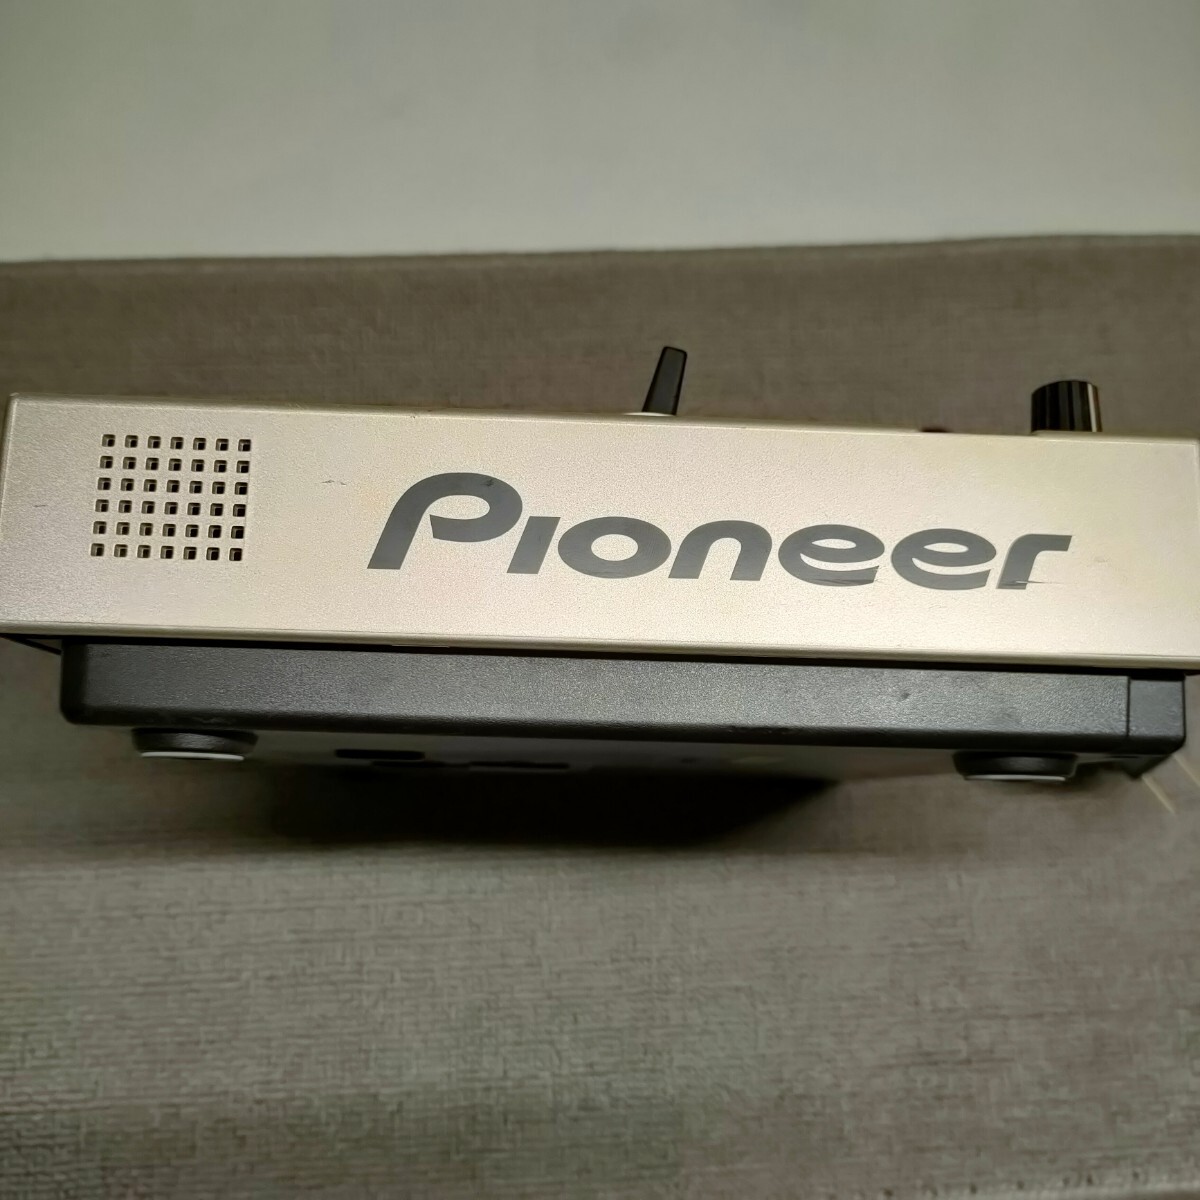 [ free shipping / prompt decision ] Pioneer EFX-500 PERFORMANCE EFFECTOR DJ effector Pioneer M58e2-0064